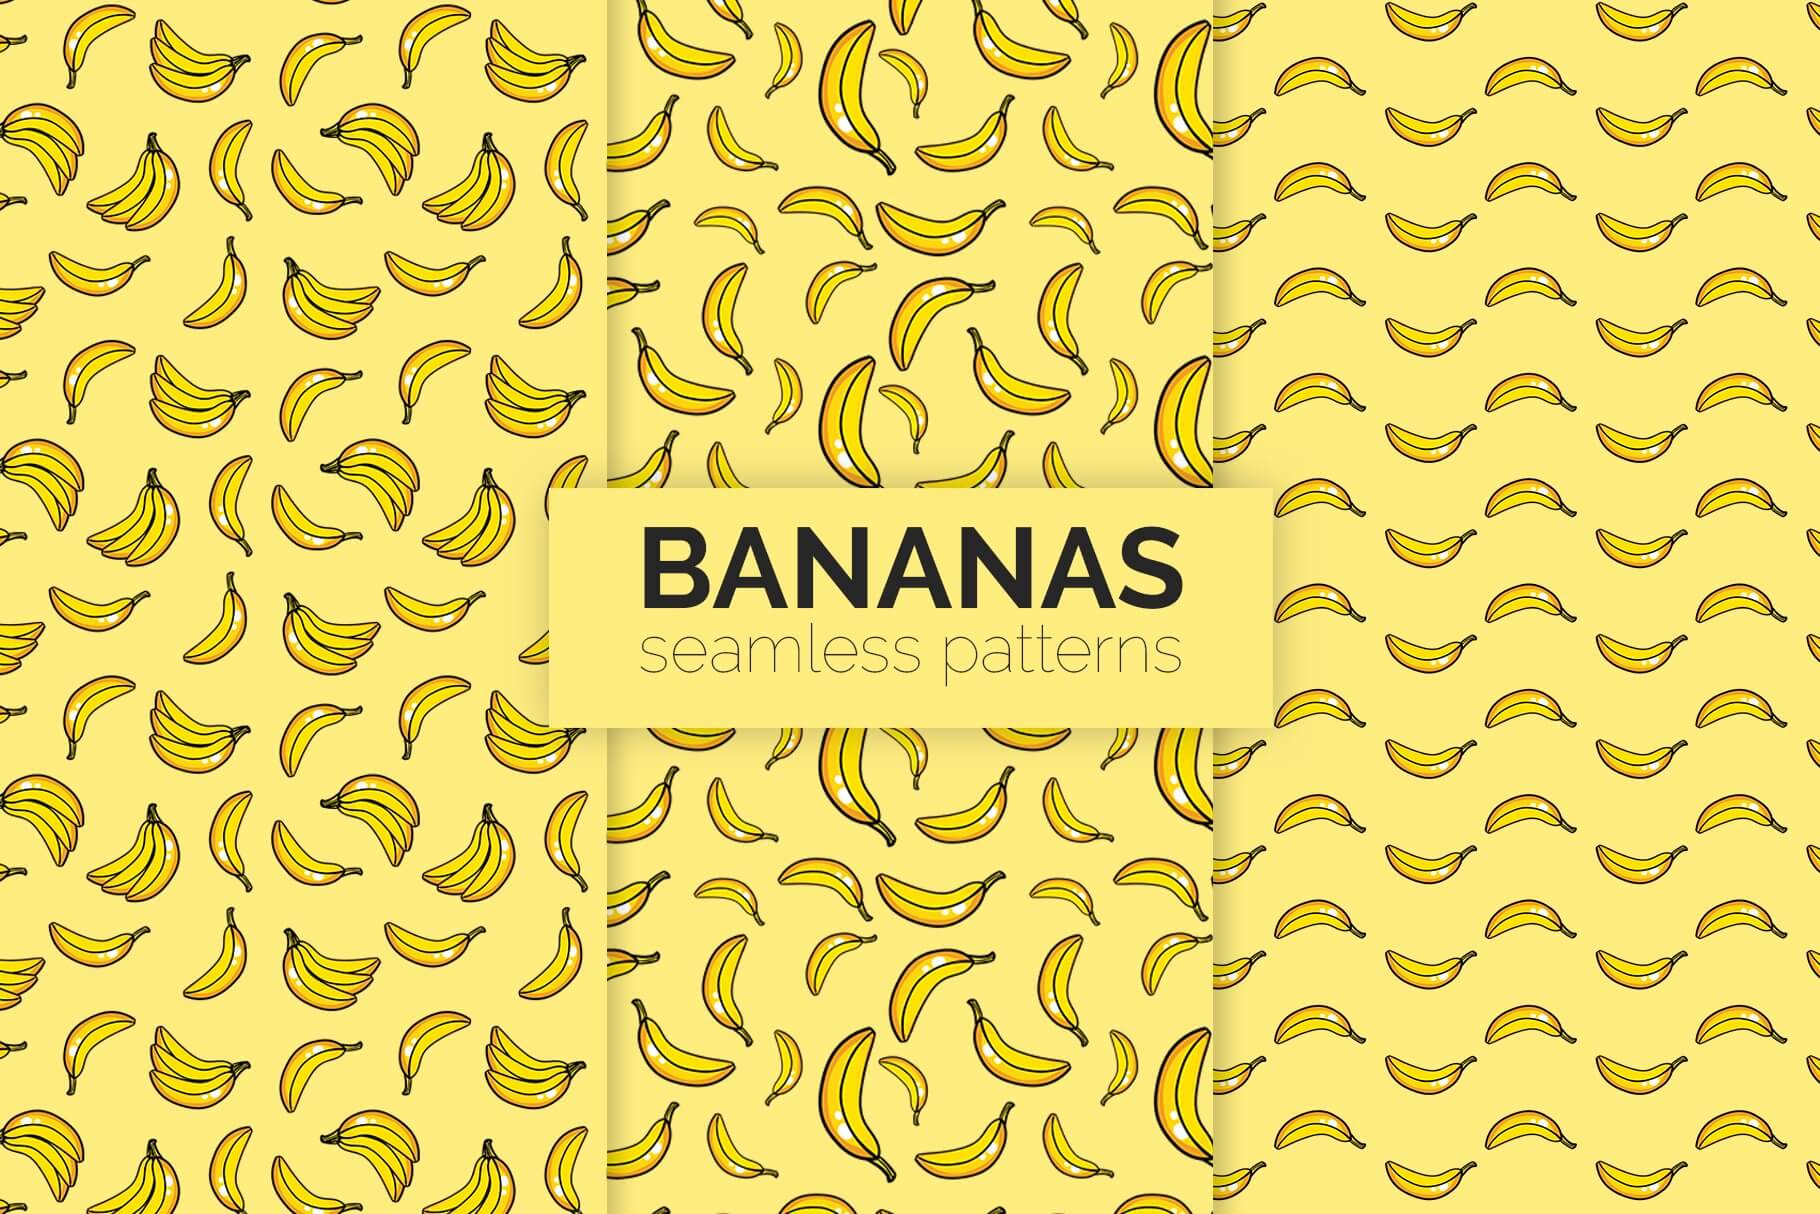 Prints with large and small bananas on a yellow background.